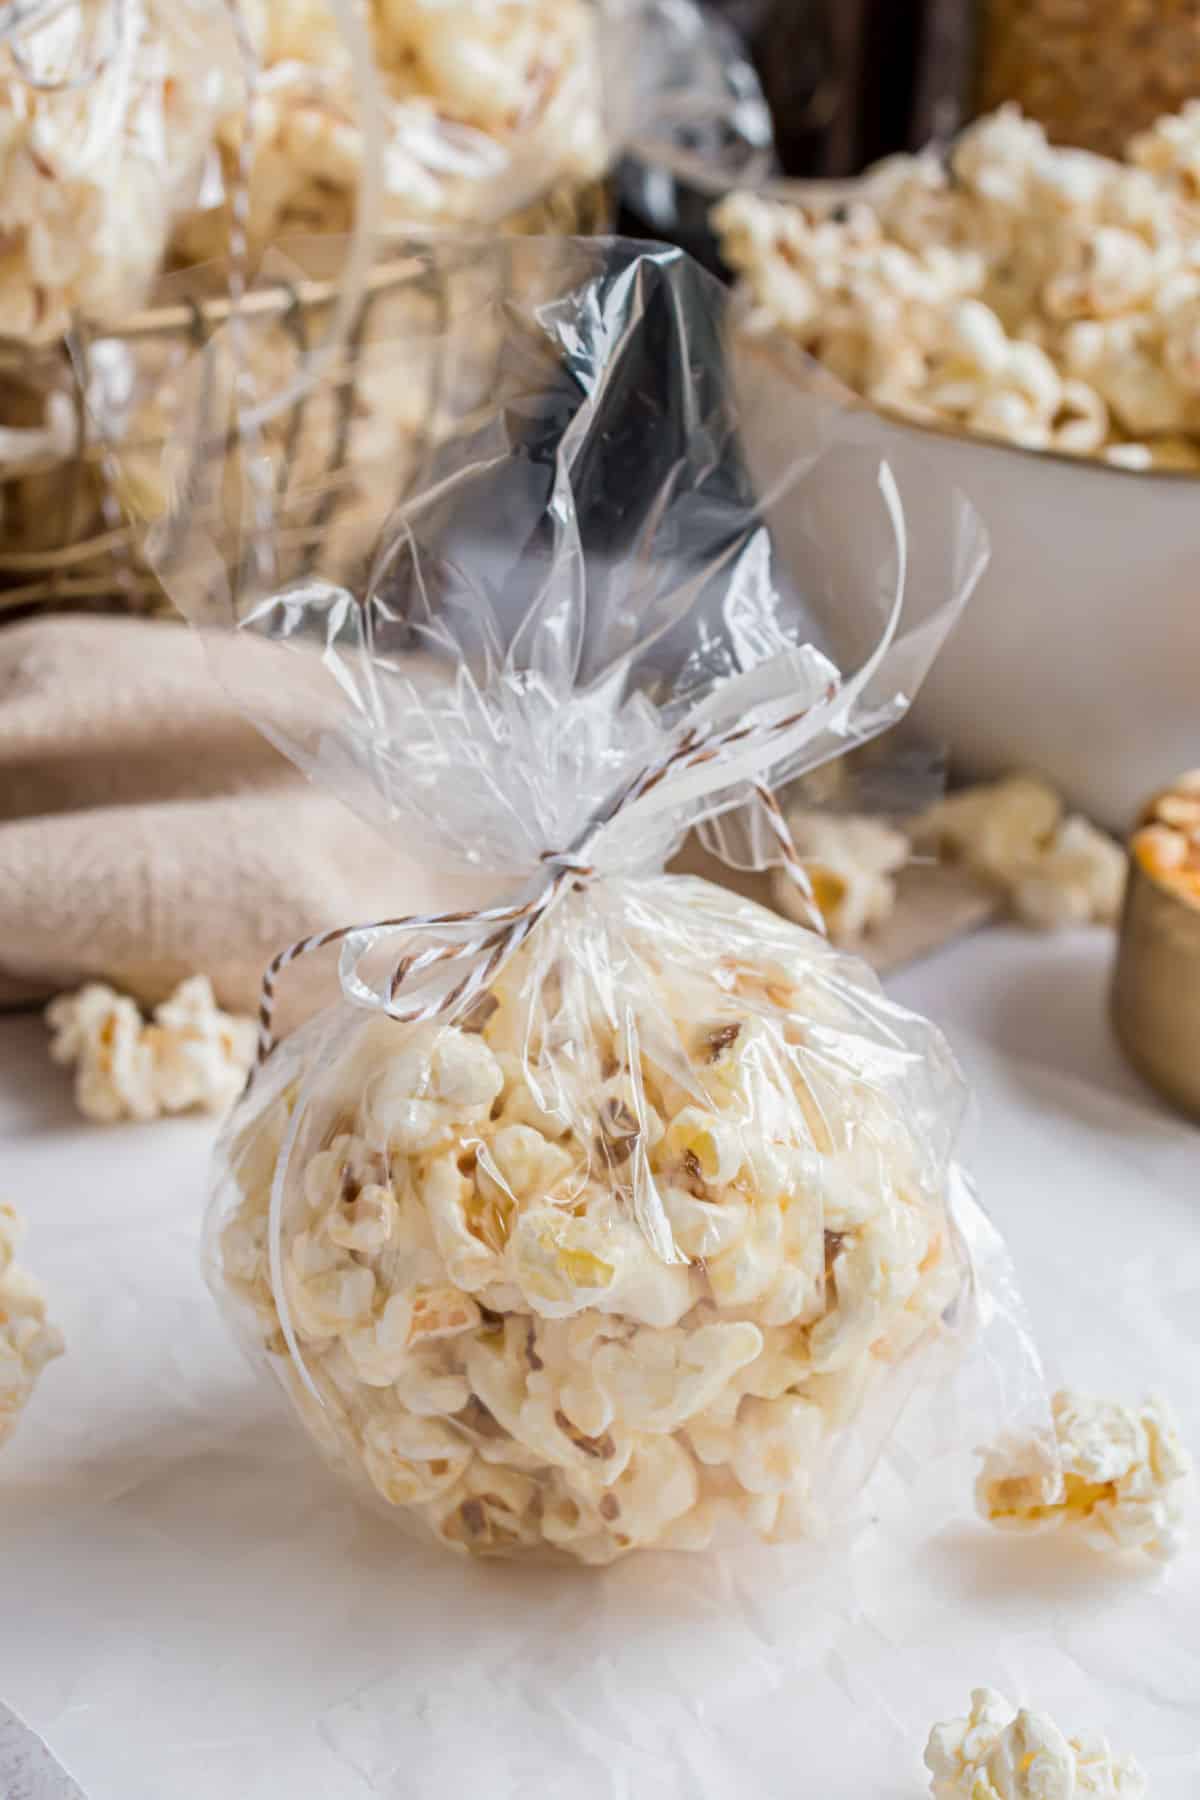 Homemade popcorn balls wrapped in baggies and tied off with string for gifts.